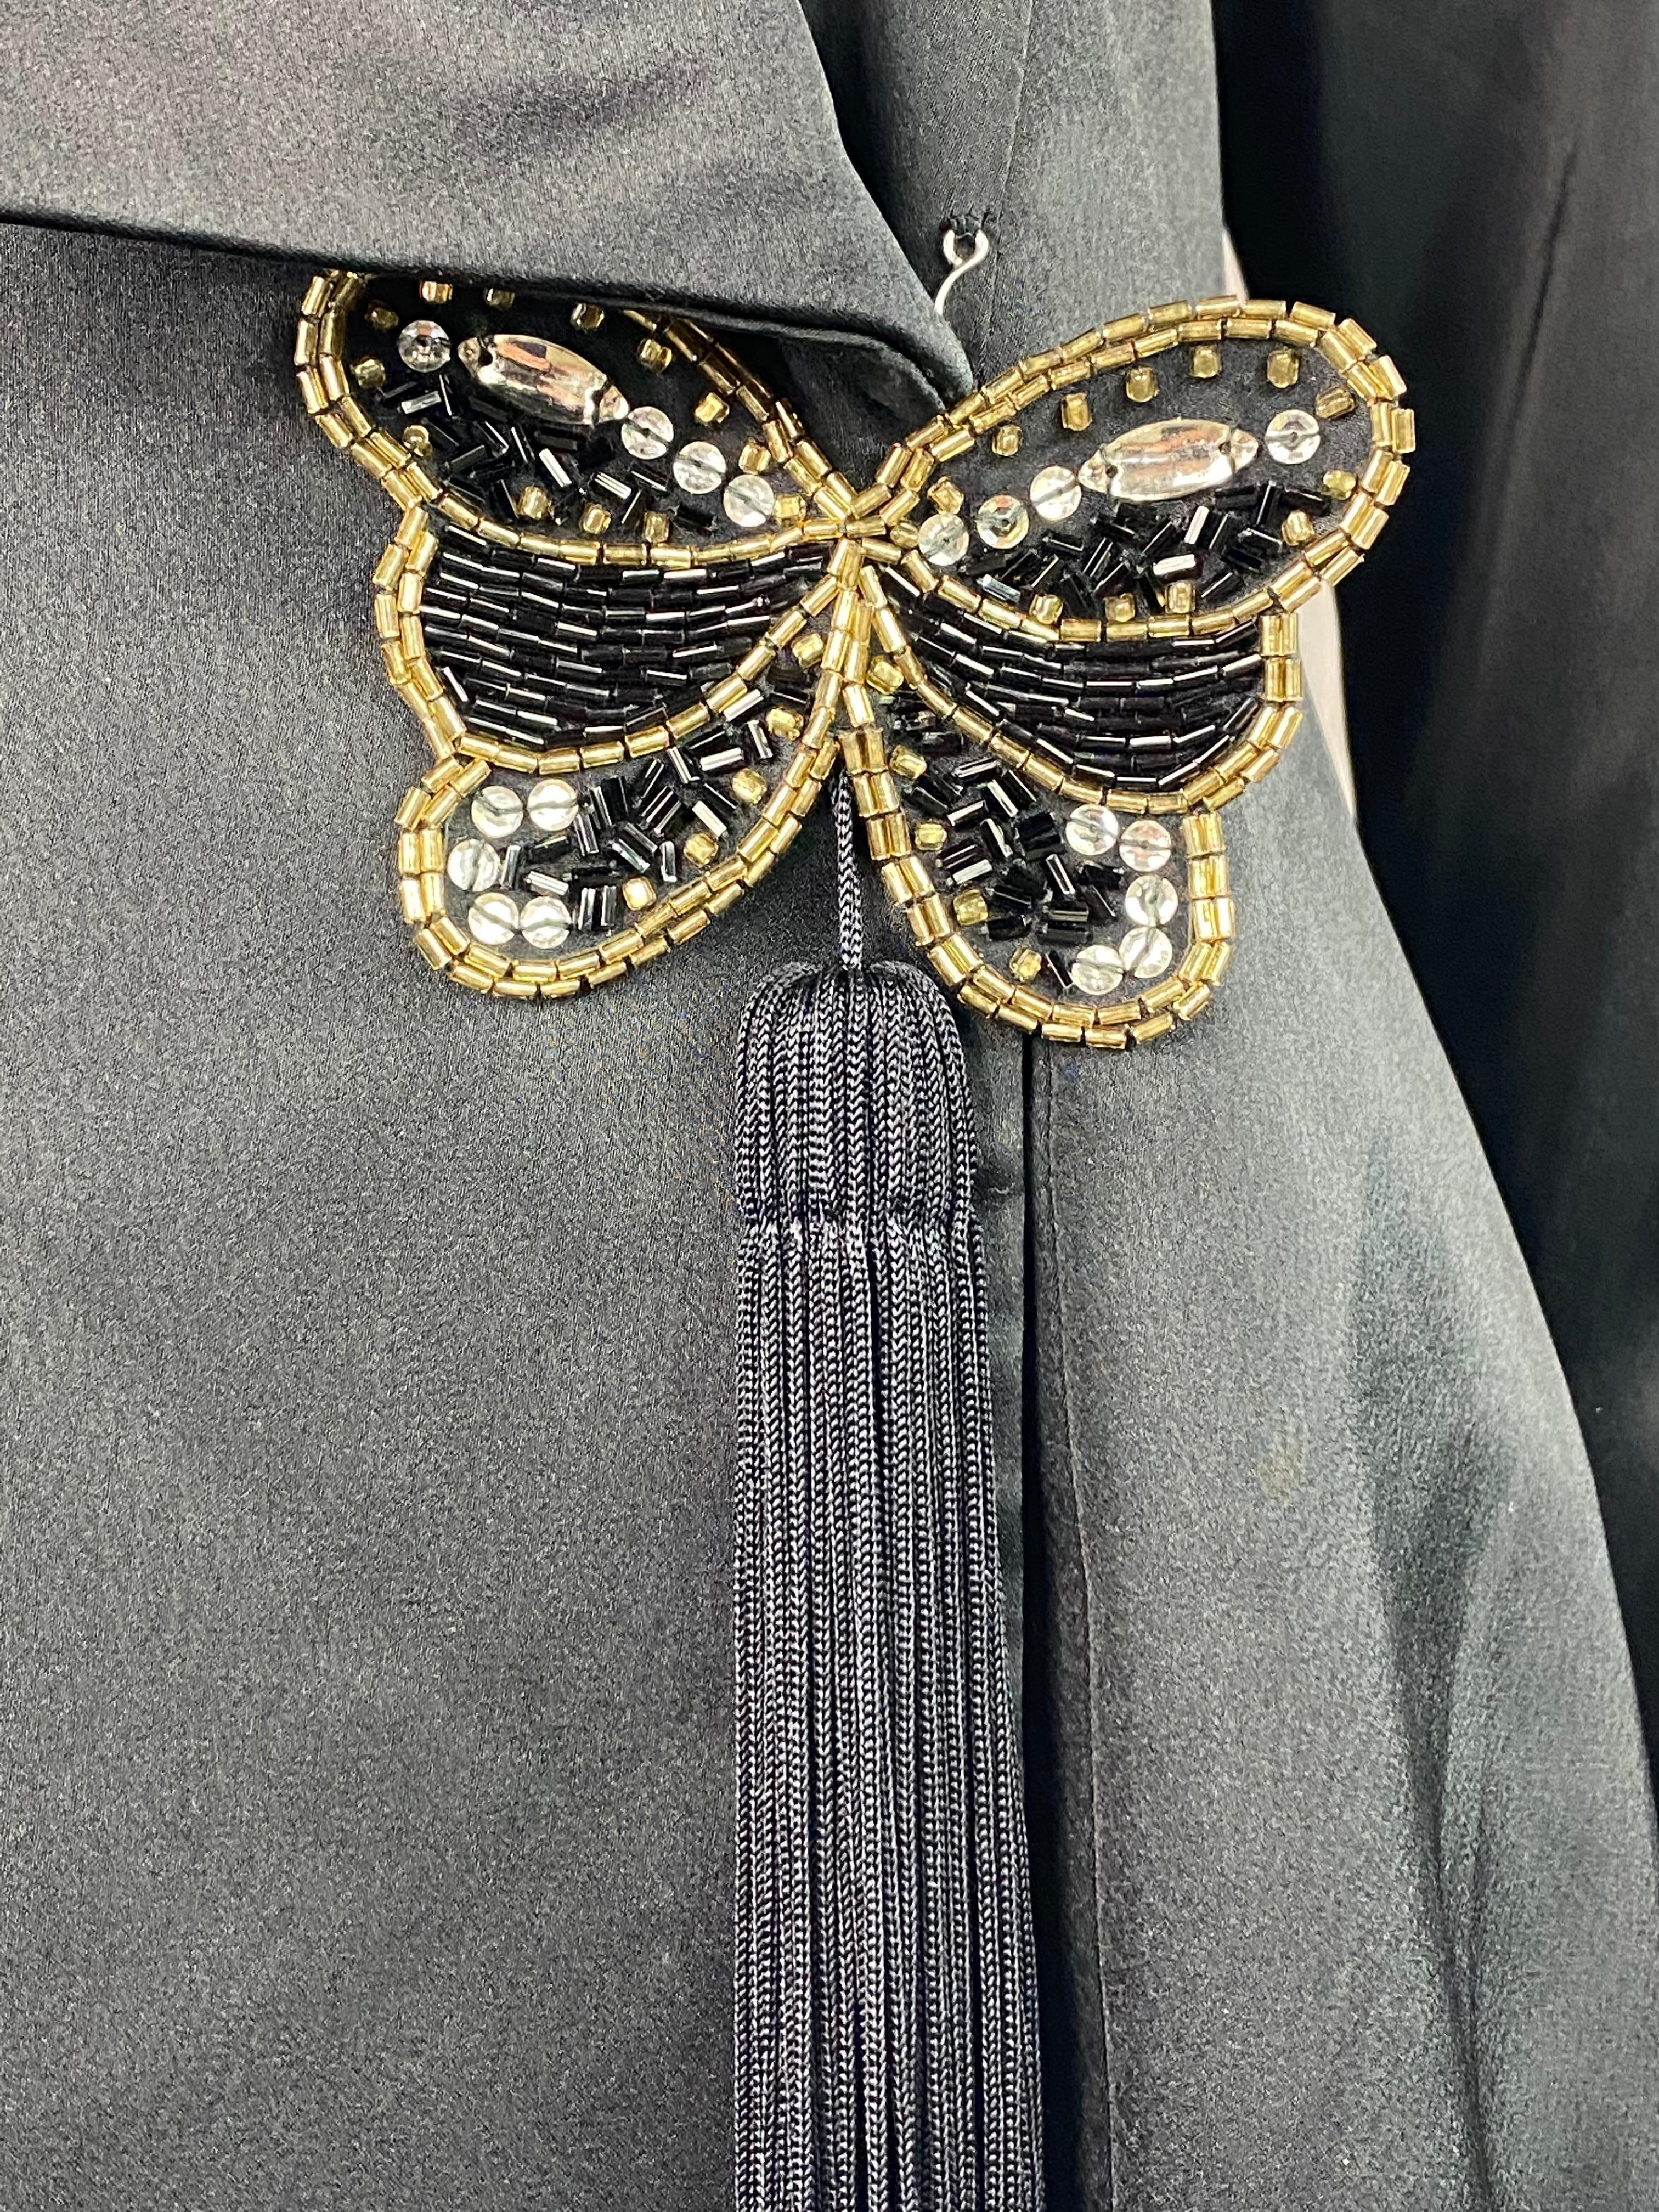 Product details:

The jacket features front hook closure with rhinestones butterfly detail and black tussle. Tags are missing. 